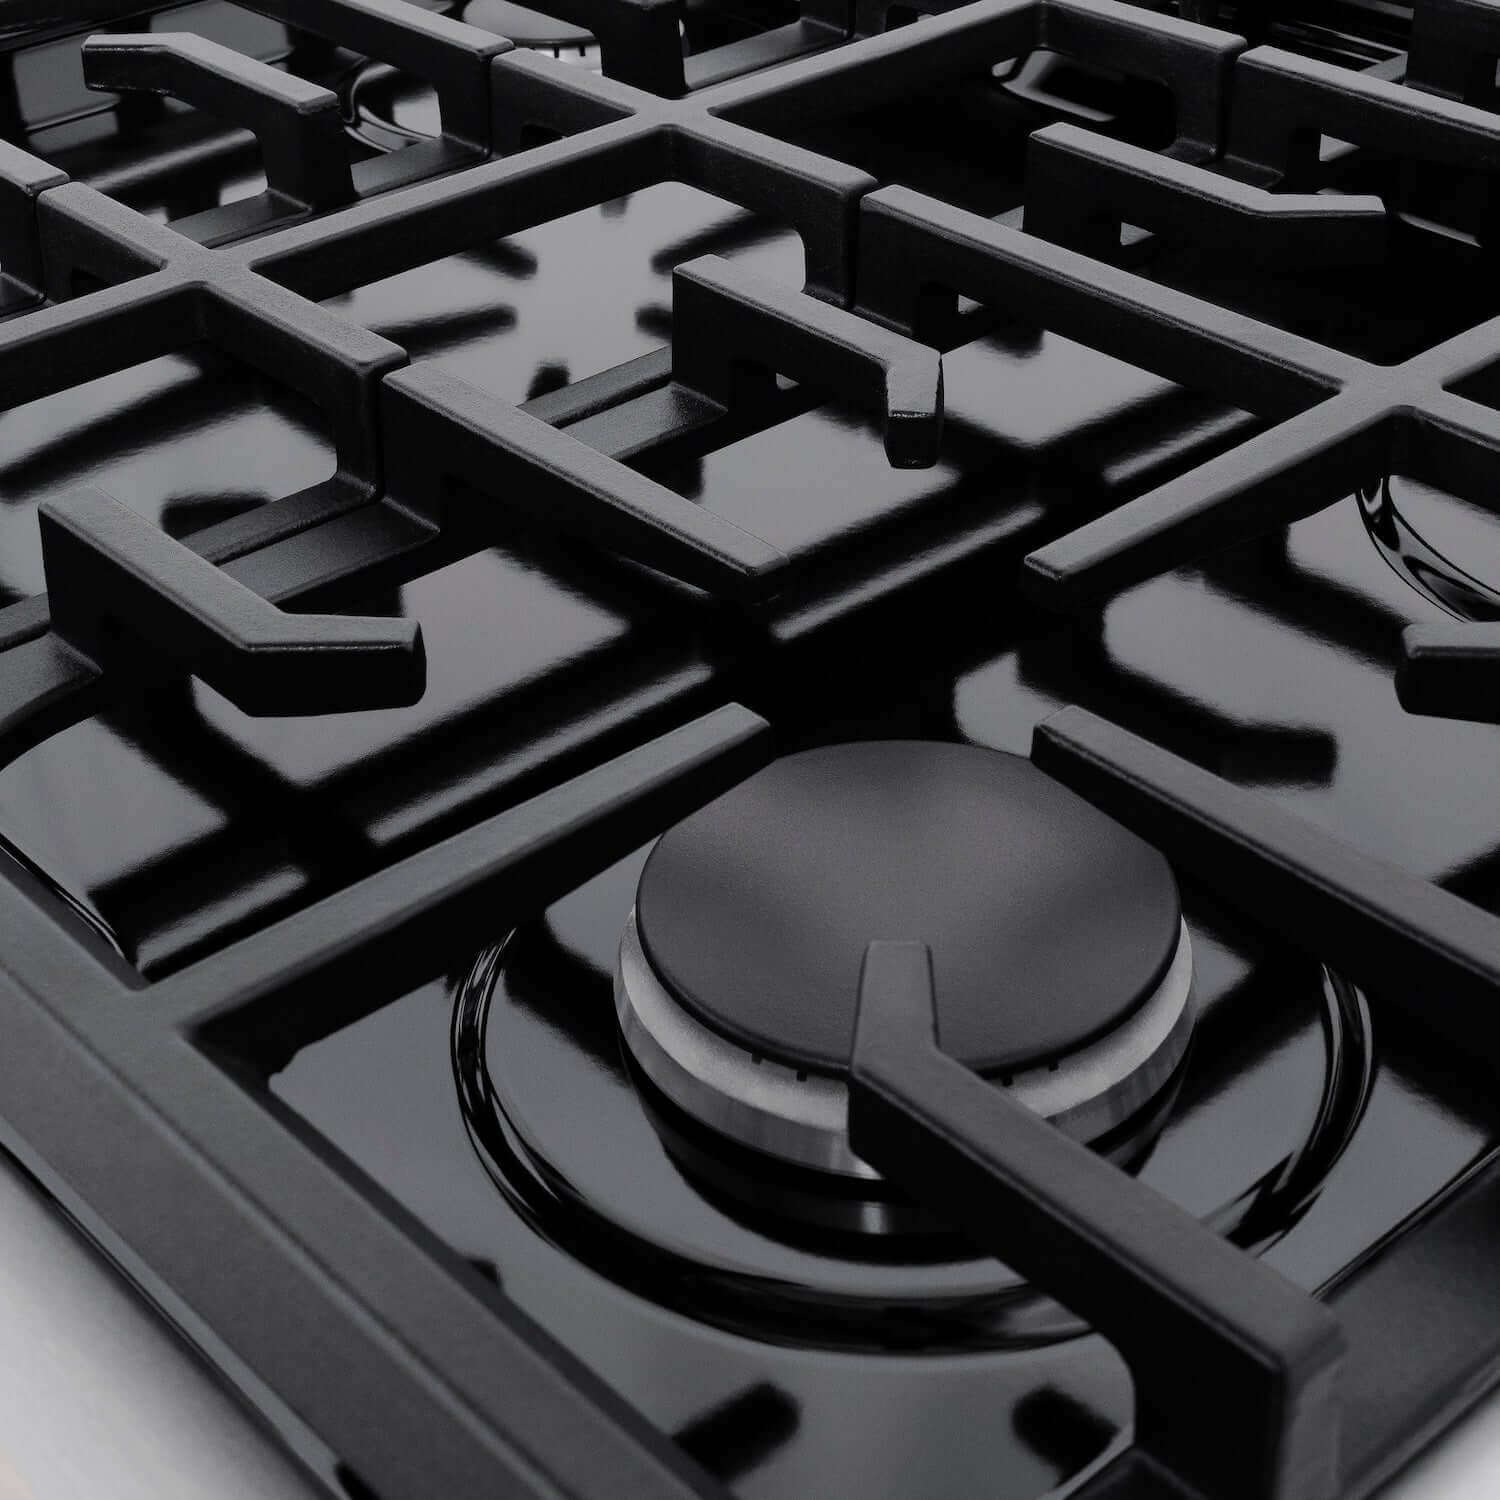 Black porcelain cooktop, burners, and cast iron grates on 30" Stainless Steel Gas Range.